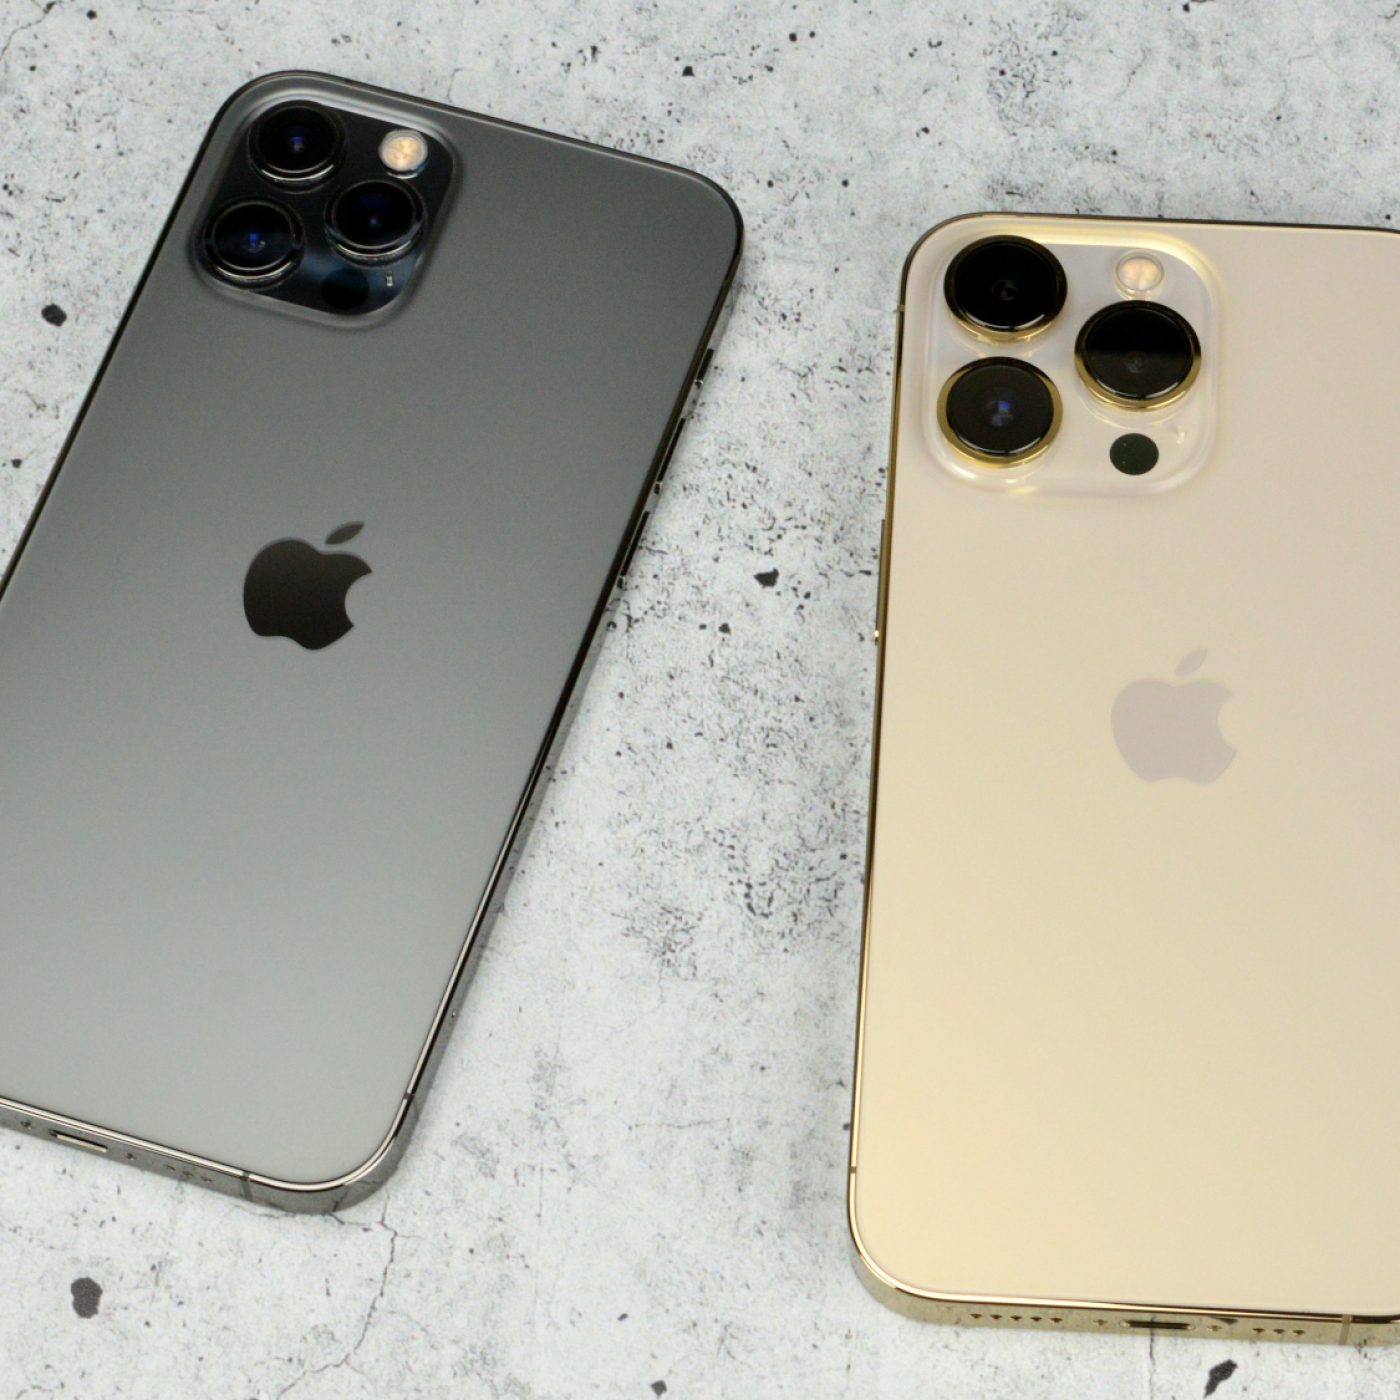 iPhone 13, iPhone 12, iPhone 11 users! Should you upgrade to iPhone 14  soon? We tell you Yes or No